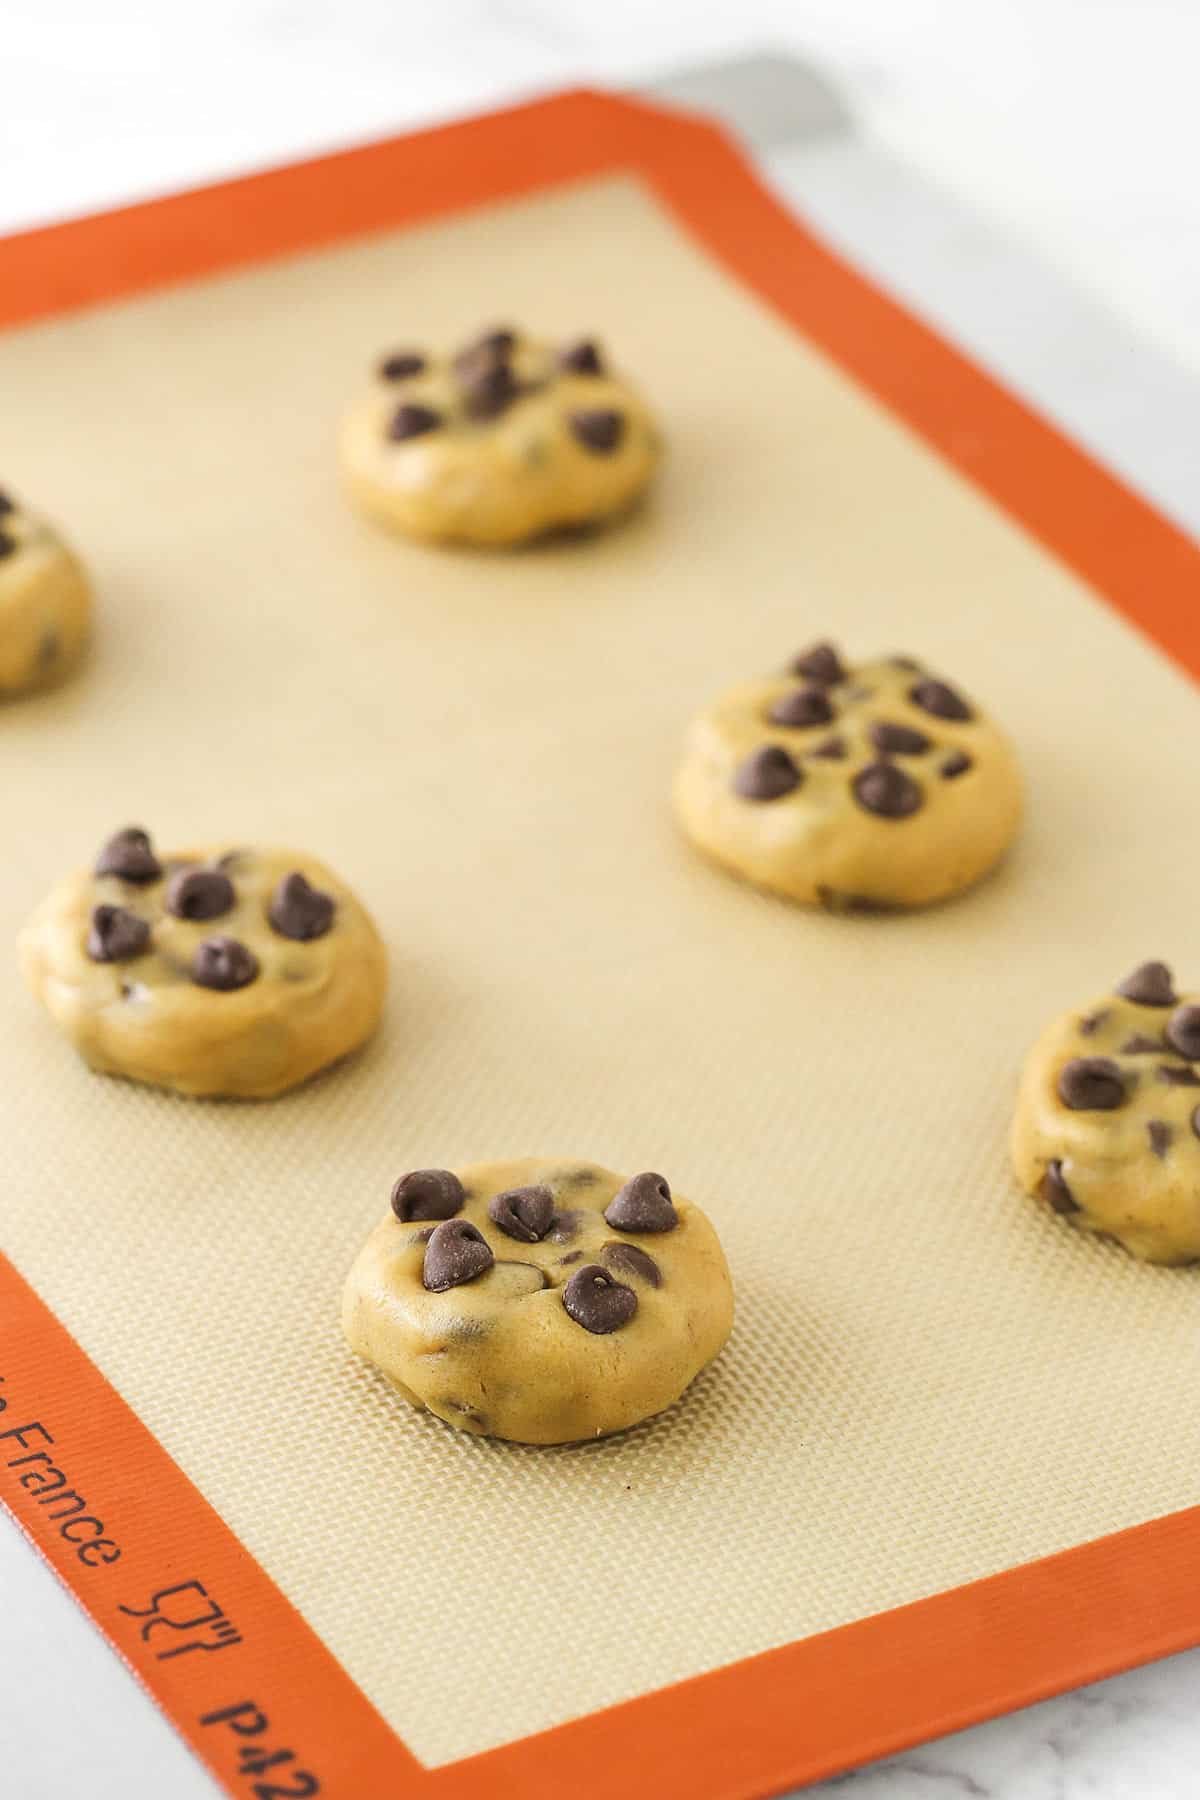 Cookie dough balls on a silicone baking mat